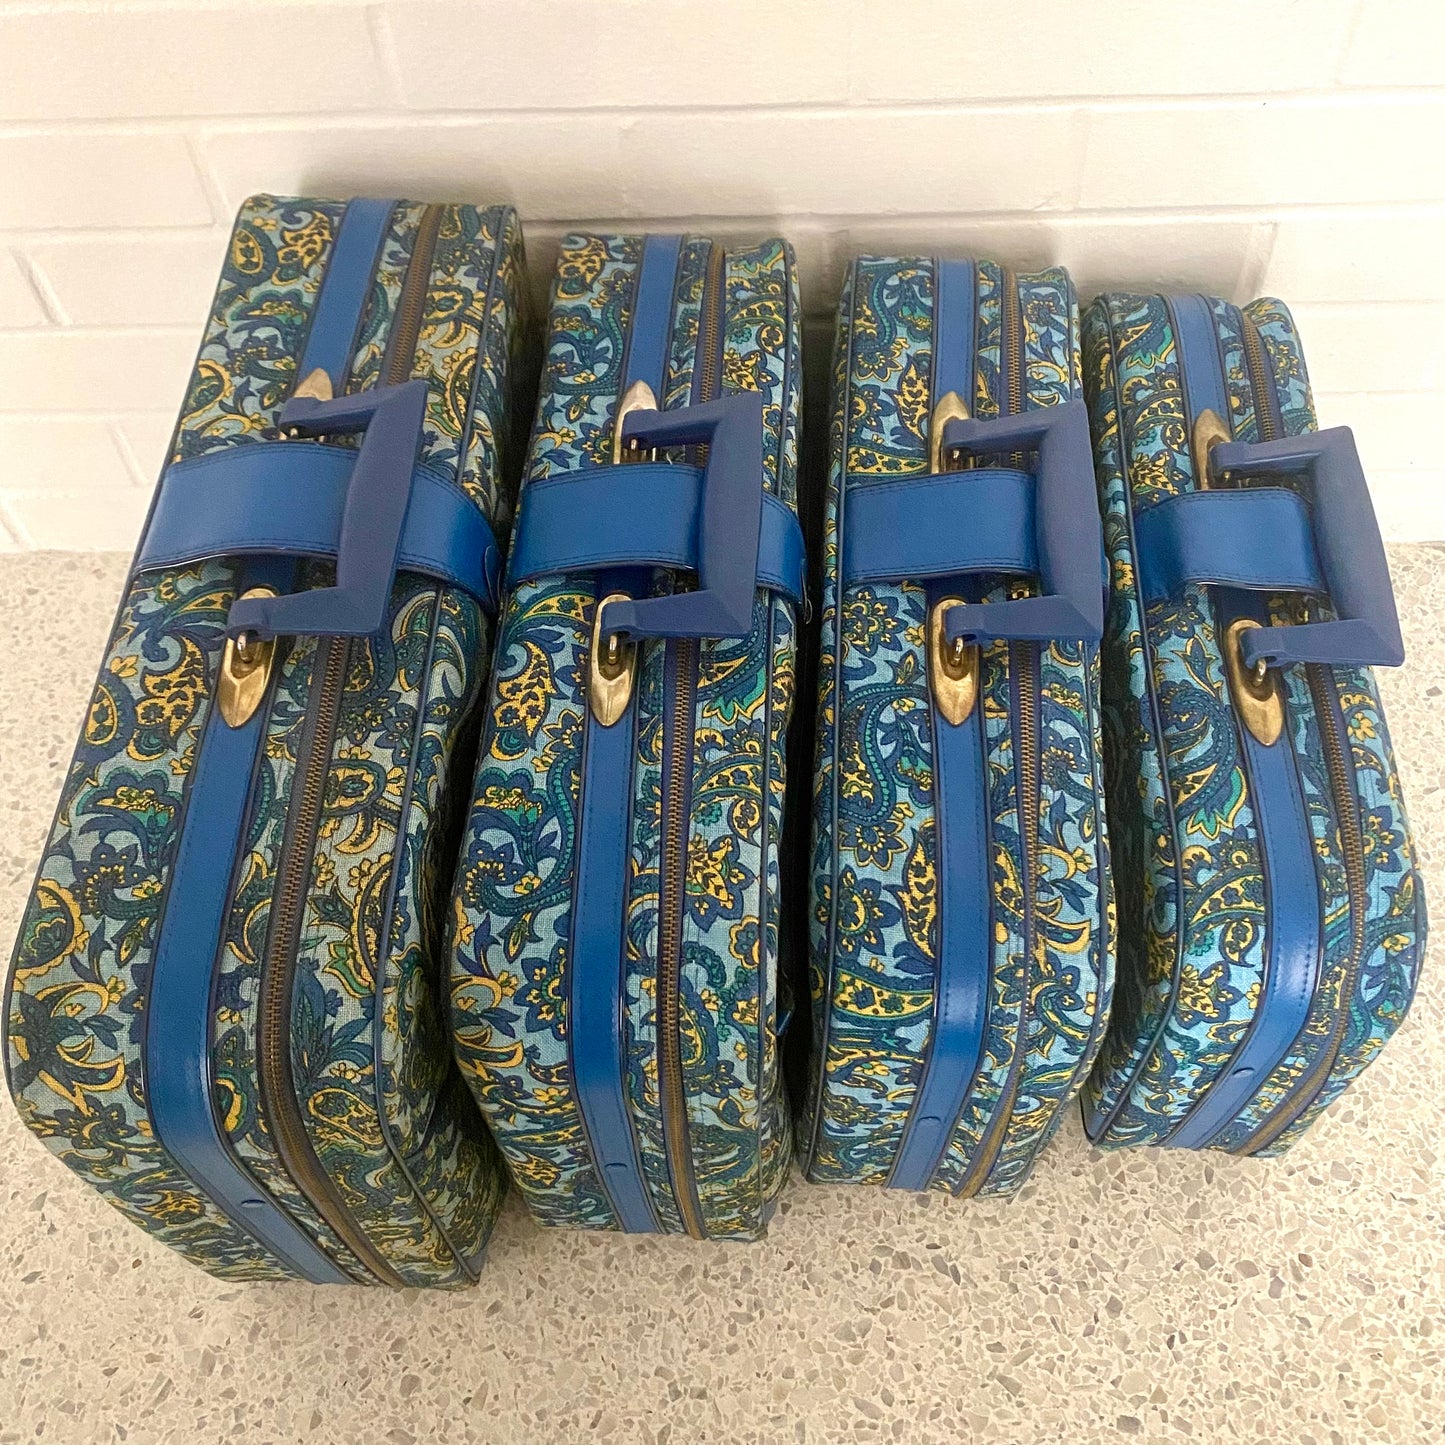 Late 60s/ Early 70s Set of 4 Nesting Suitcases